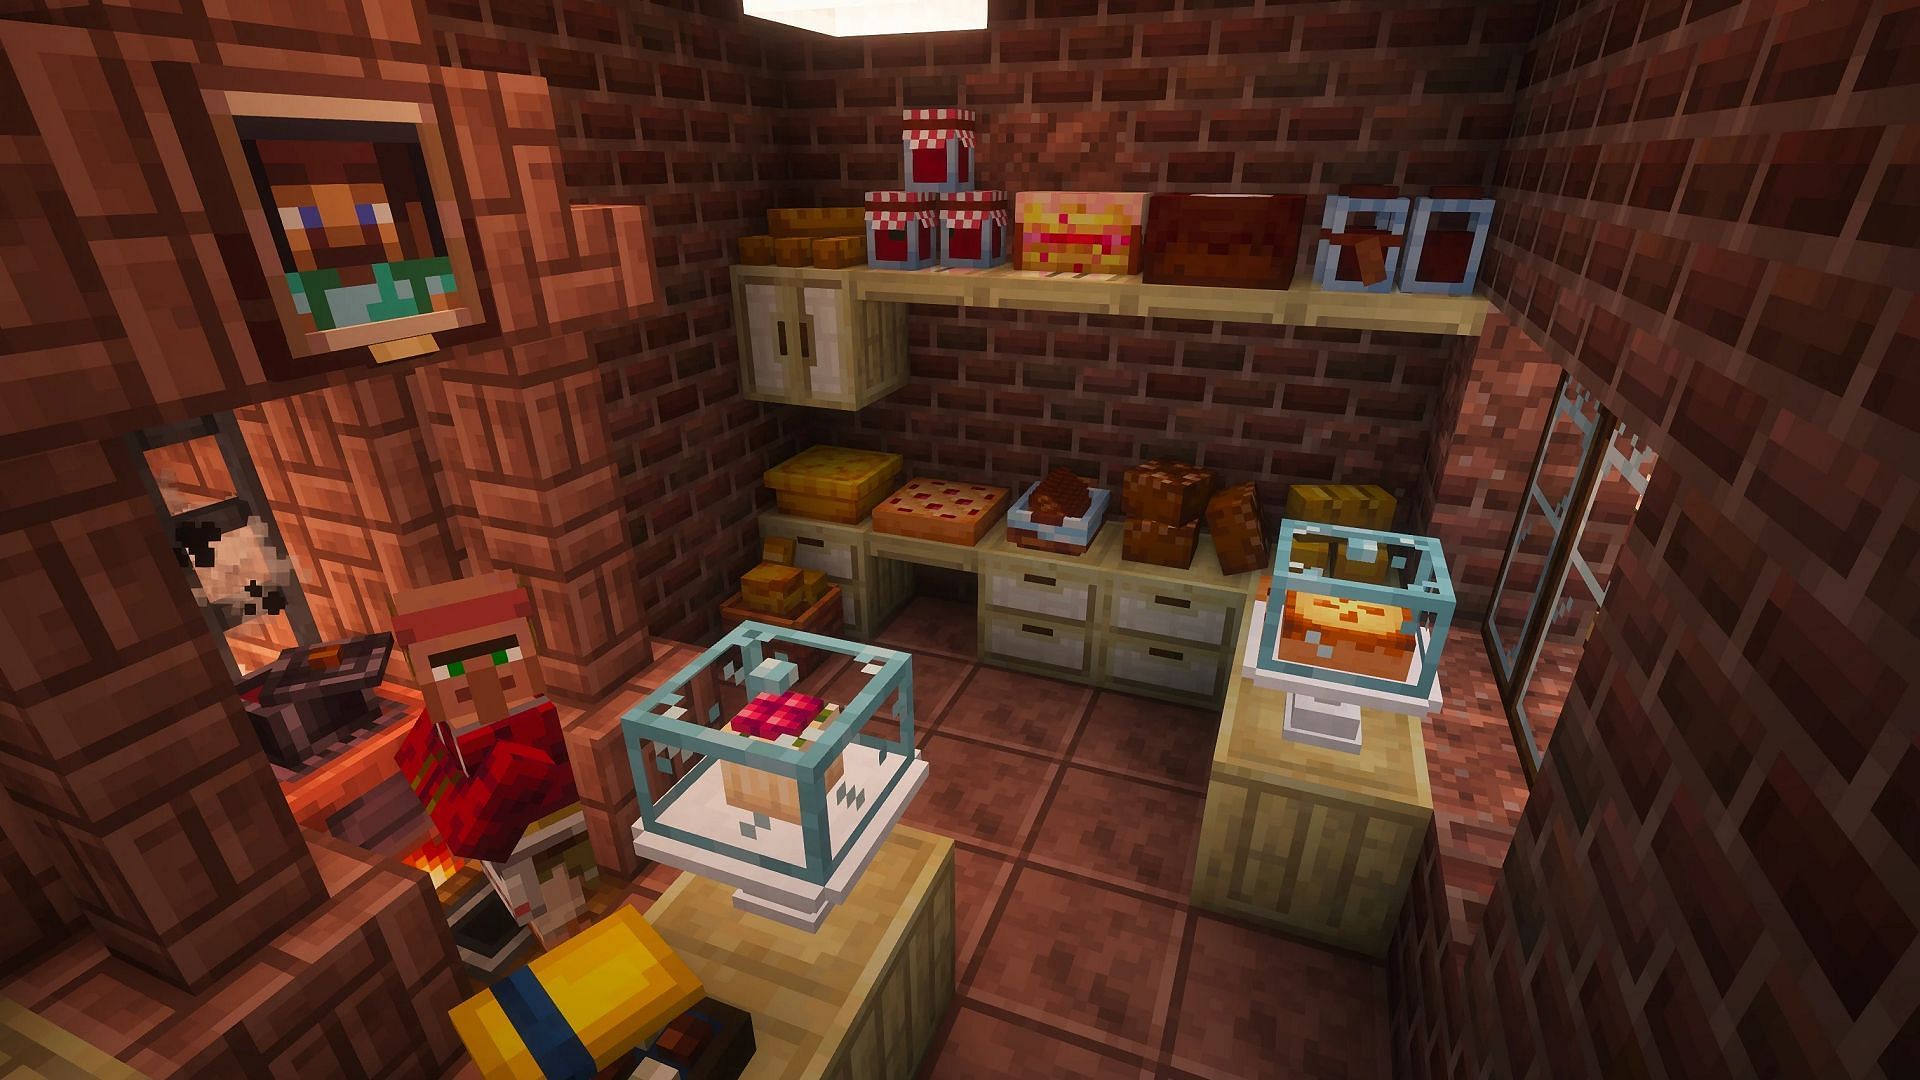 This mod takes a different approach to making tasty kitchen snacks. (Image via Satisfyu/Modrinth)